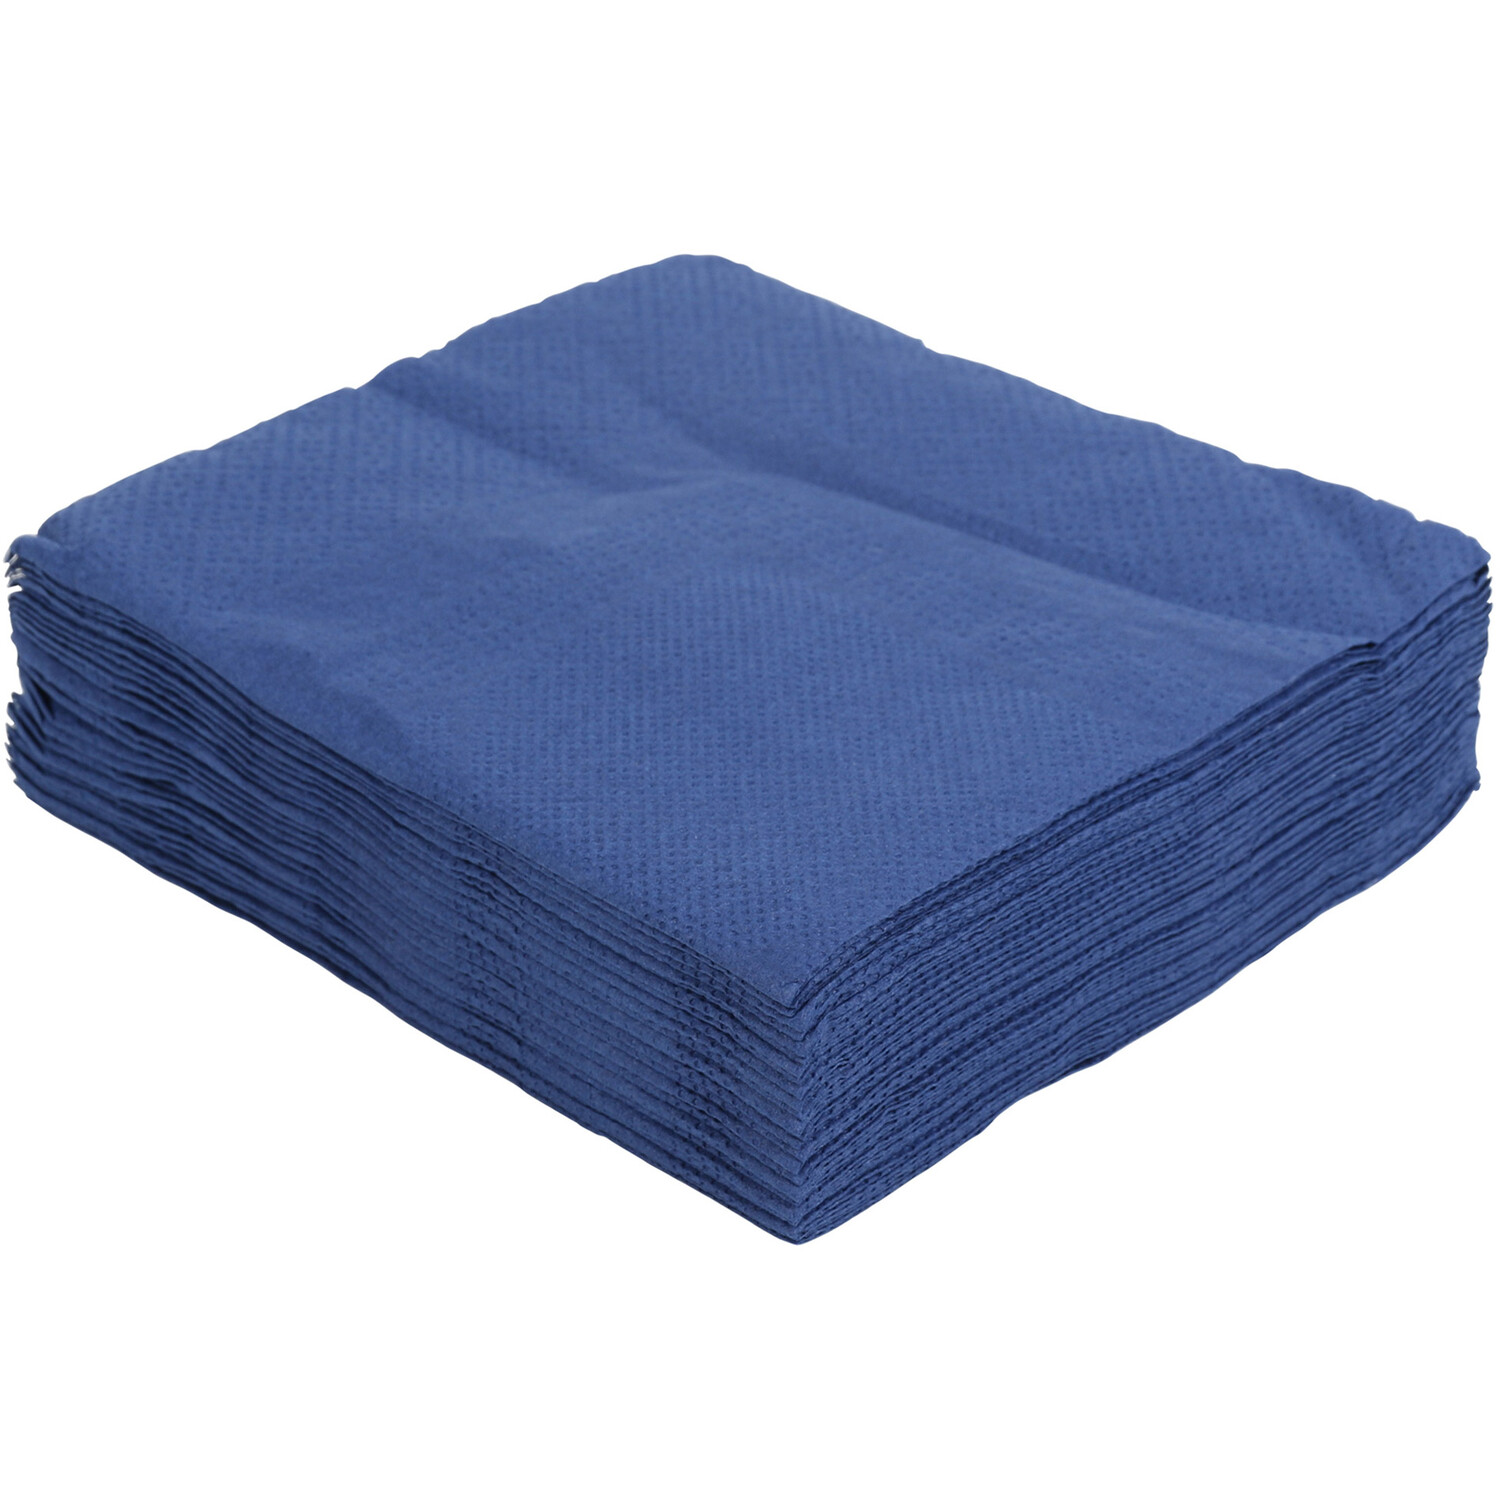 Pack of My Home Napkins - Blue Image 2